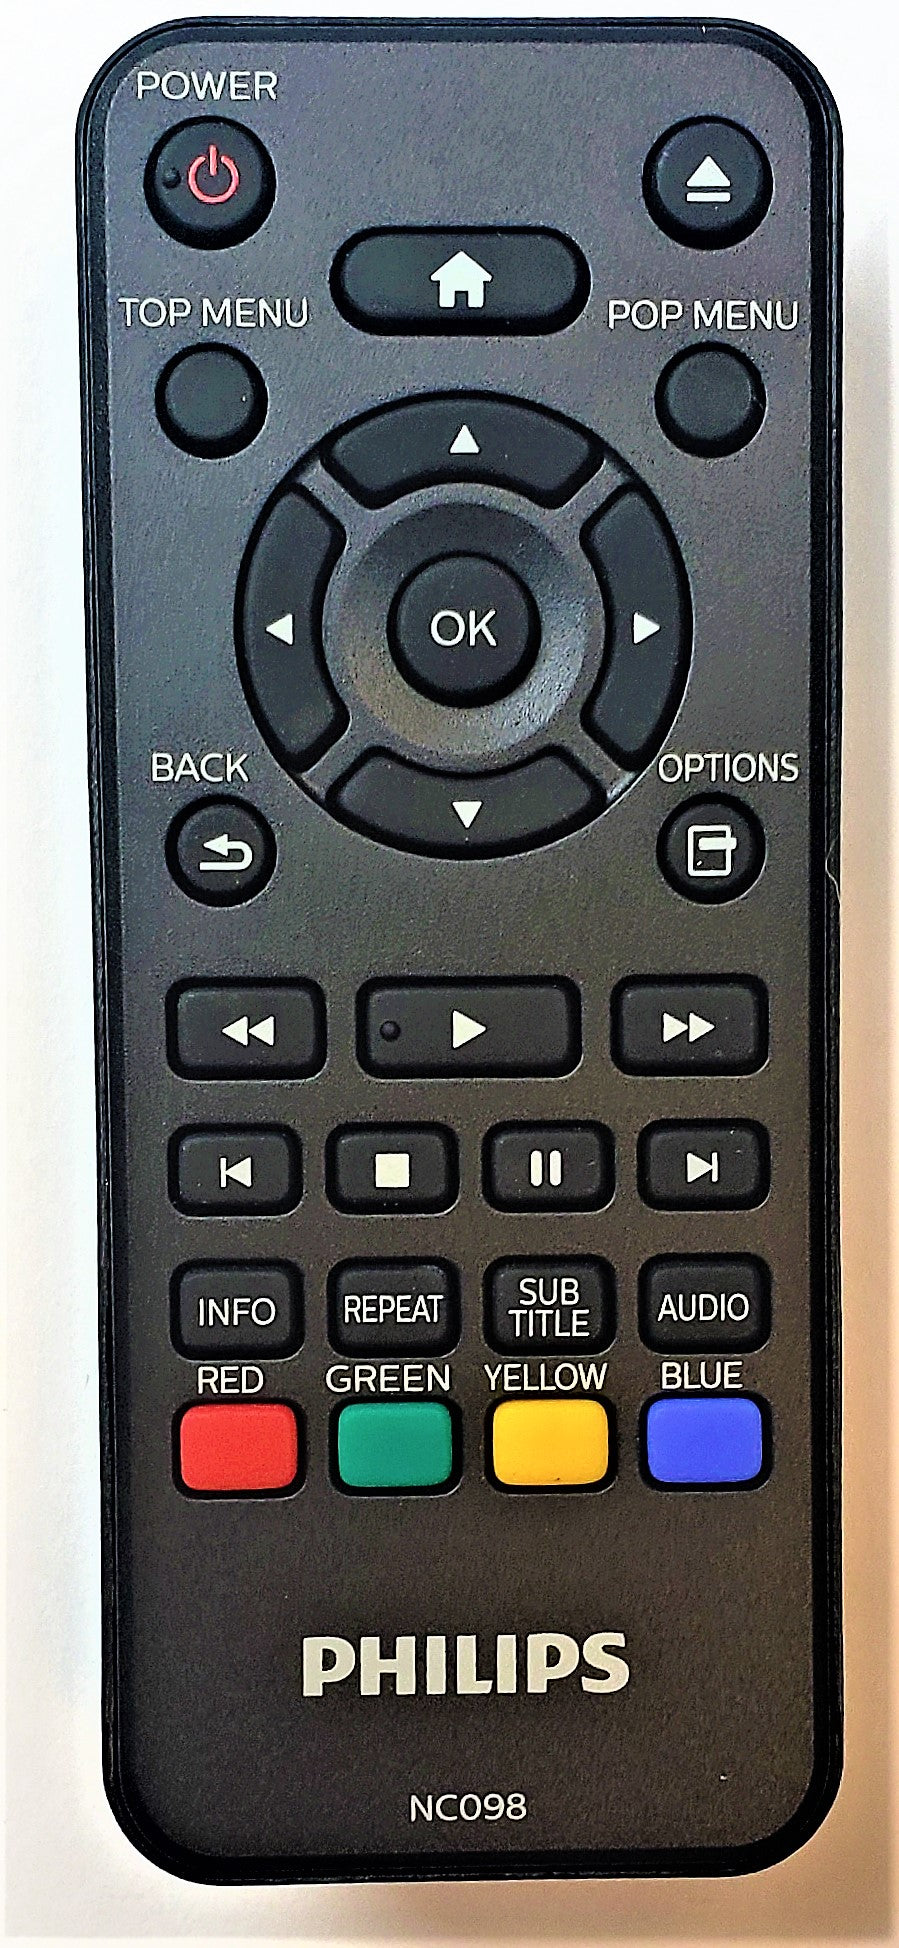 Original OEM replacement remote control for Philips Blu-ray players NC098UL